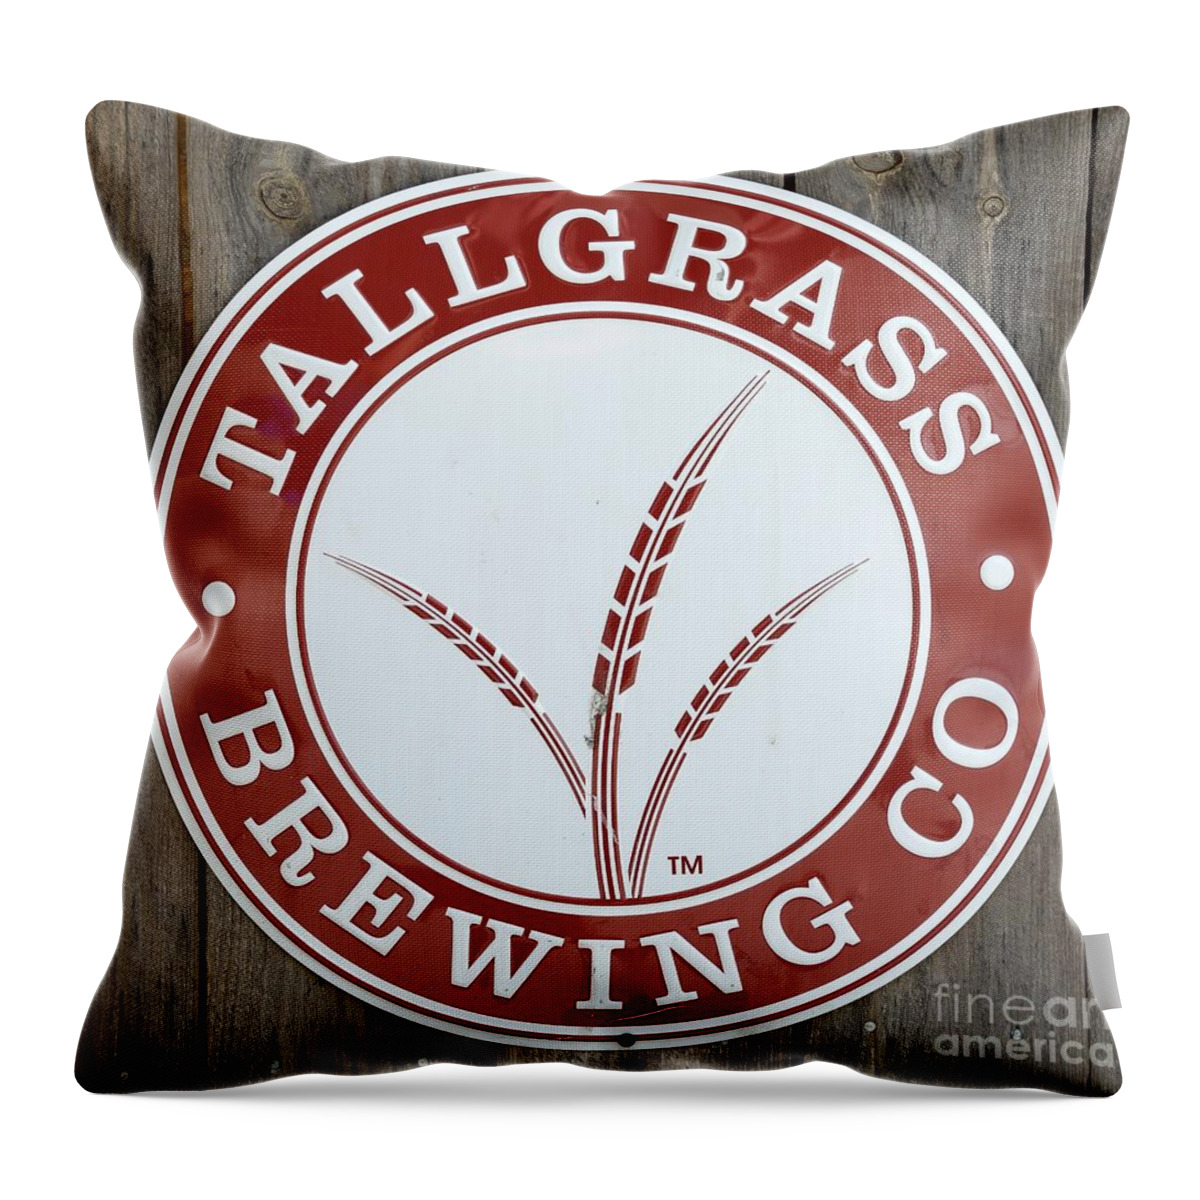 Tallgrass Brewing Company Beer Ale Tall Grass Alcohol Liquor Metal Sign Throw Pillow featuring the photograph Tallgrass Breweing Company 8079 by Ken DePue